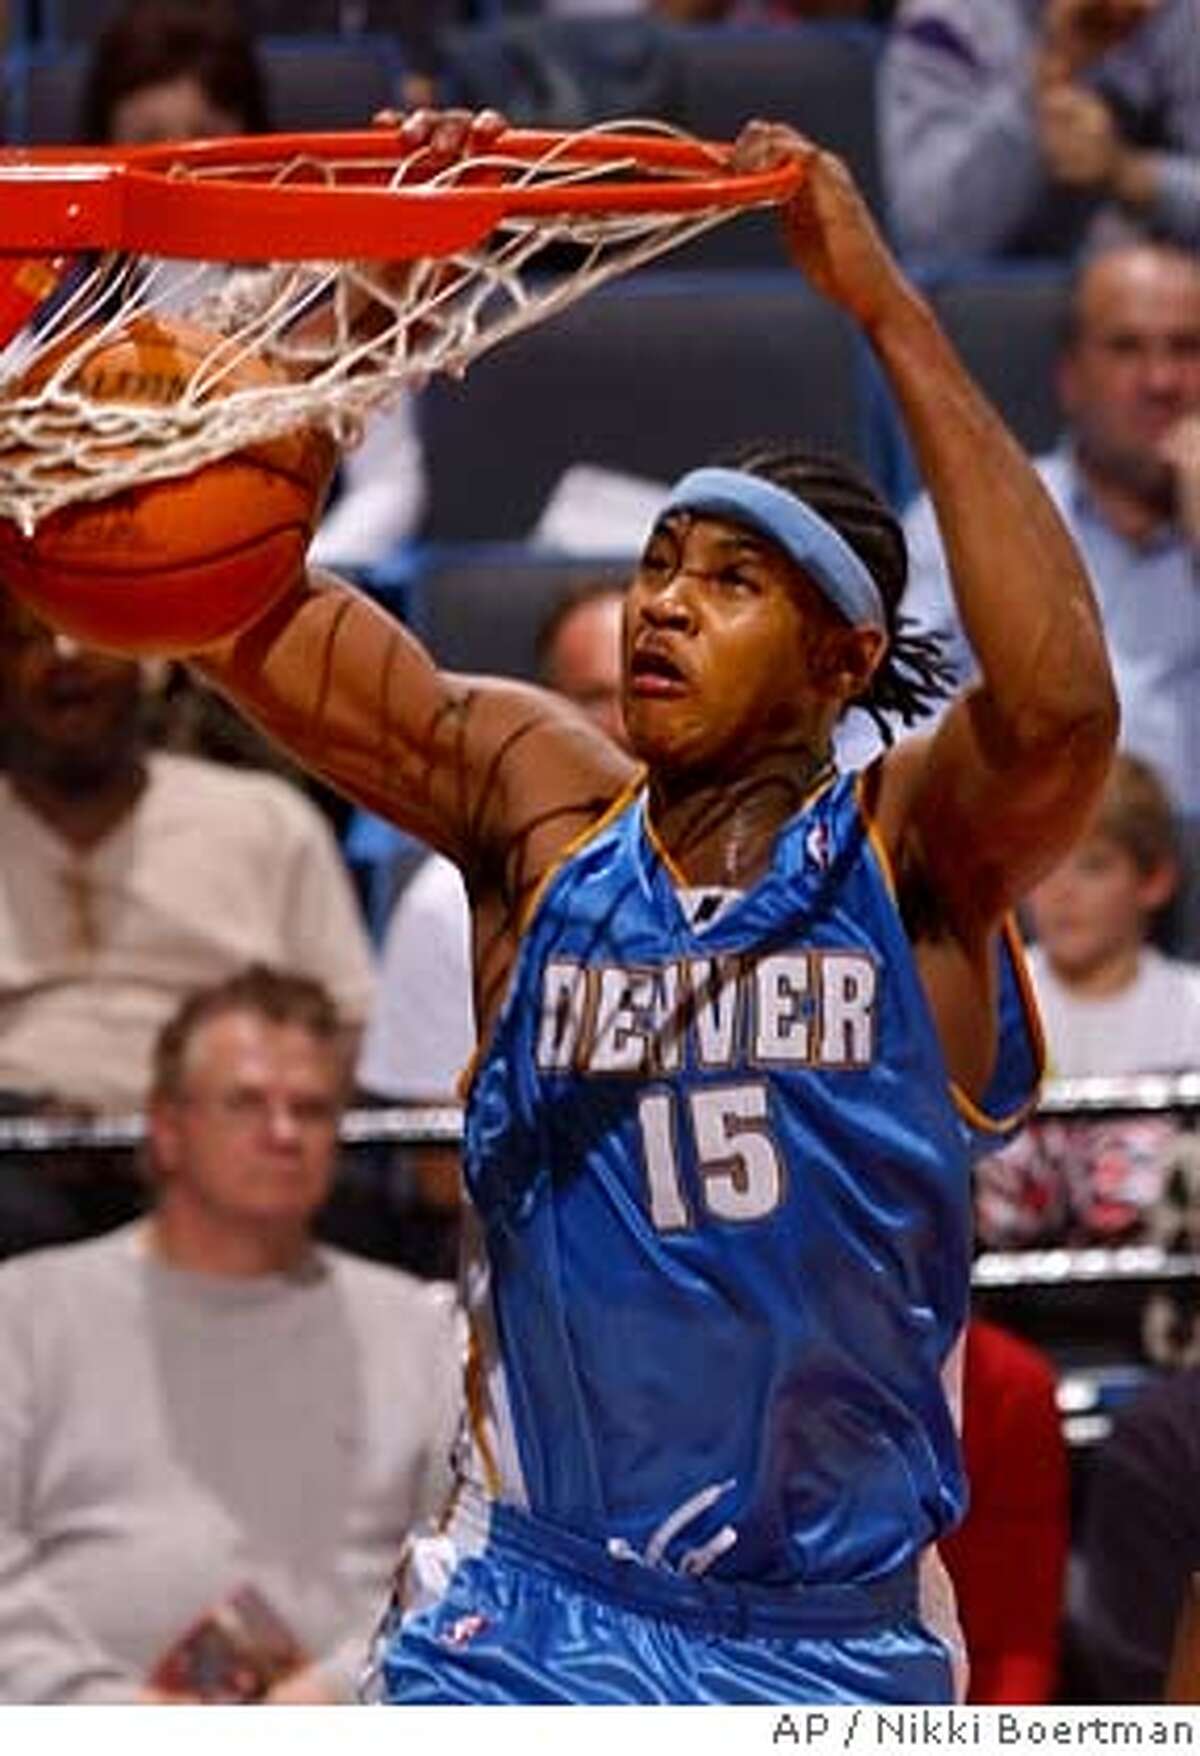 Denver Nuggets Carmelo Anthony dunks uncontested during the third quarter against the Memphis Grizzlies Sunday, Jan. 25, 2004 in Memphis, Tenn. Anthony led the scoring for the Nuggets with 25 points but the Grizzlies won, 106-88. (AP Photo/ Nikki Boertman) Clevelands LeBron James has made the jump from high school to the NBA, but not to the All-Star Game as a rookie. Clevelands LeBron James has made the jump from high school to the NBA, but not to the All-Star Game as a rookie. Ran on: 02-13-2005 Anthony brought Denver back to respectability in his rookie year, leading a playoff push.